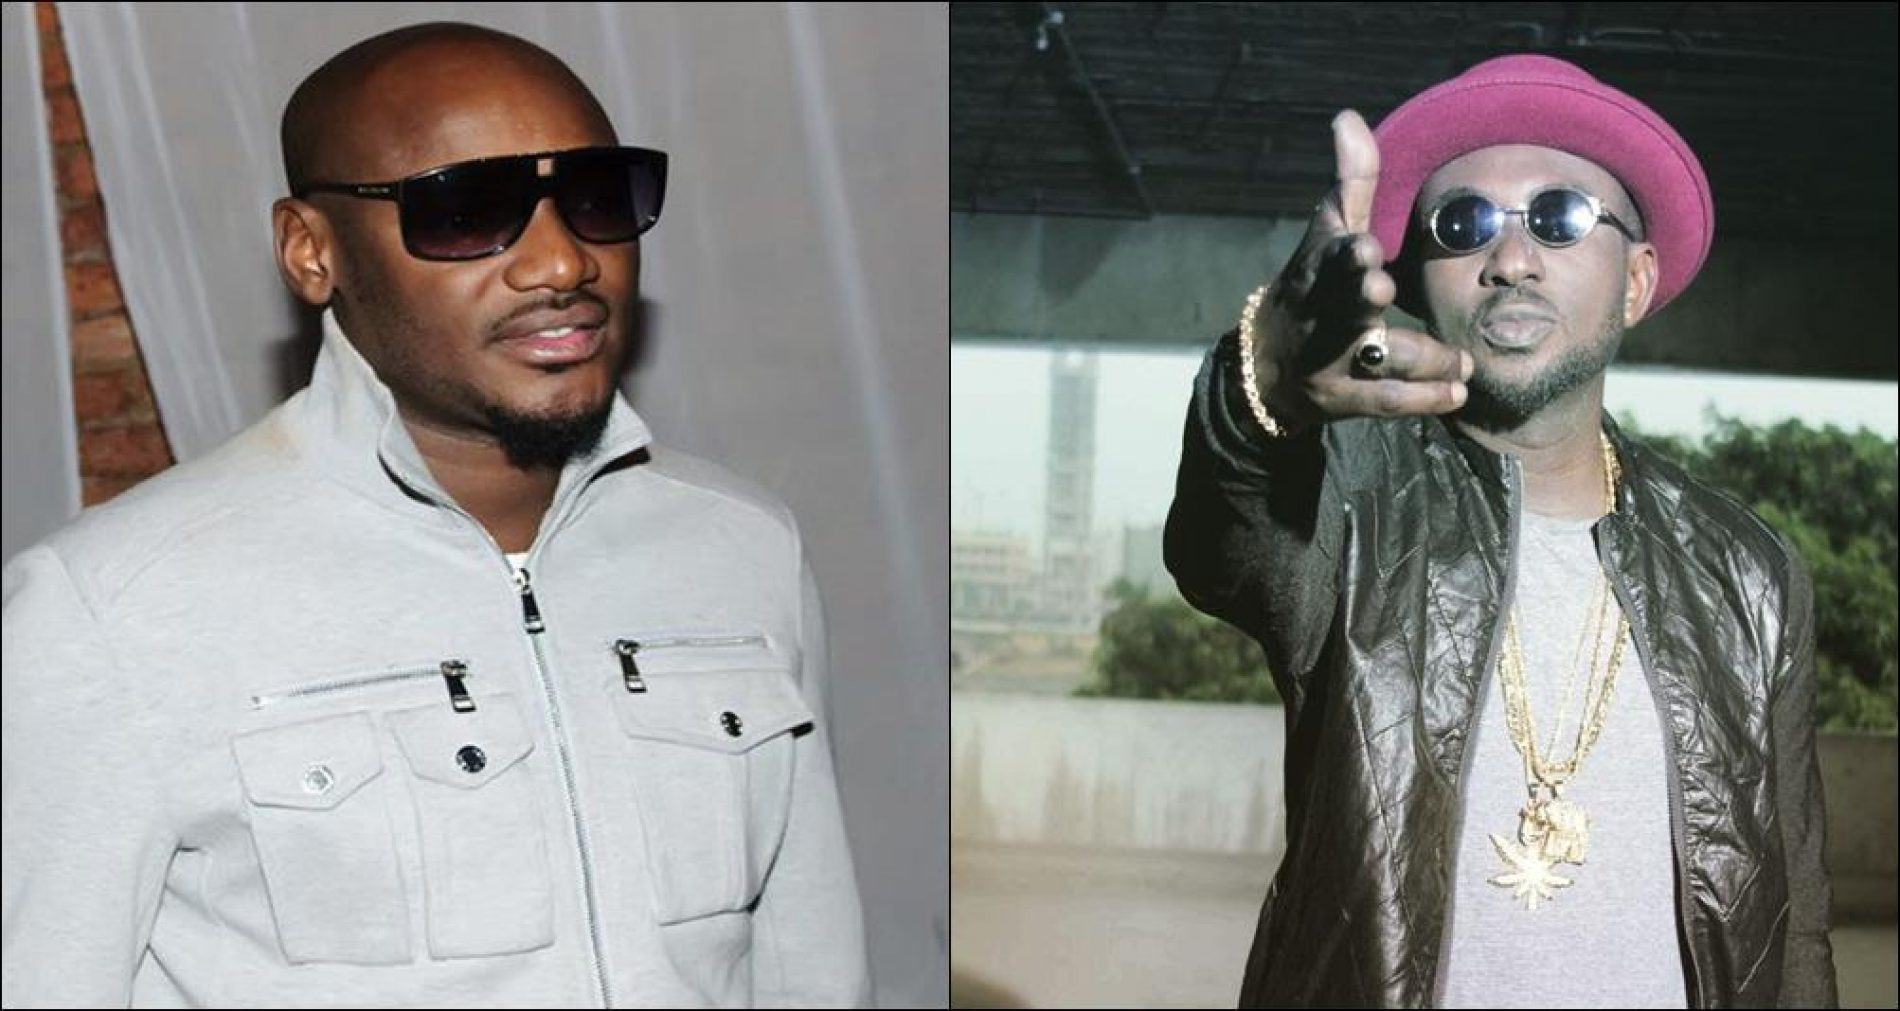 Apparently, Blackface called Tuface “gay” in his diss track as an insult